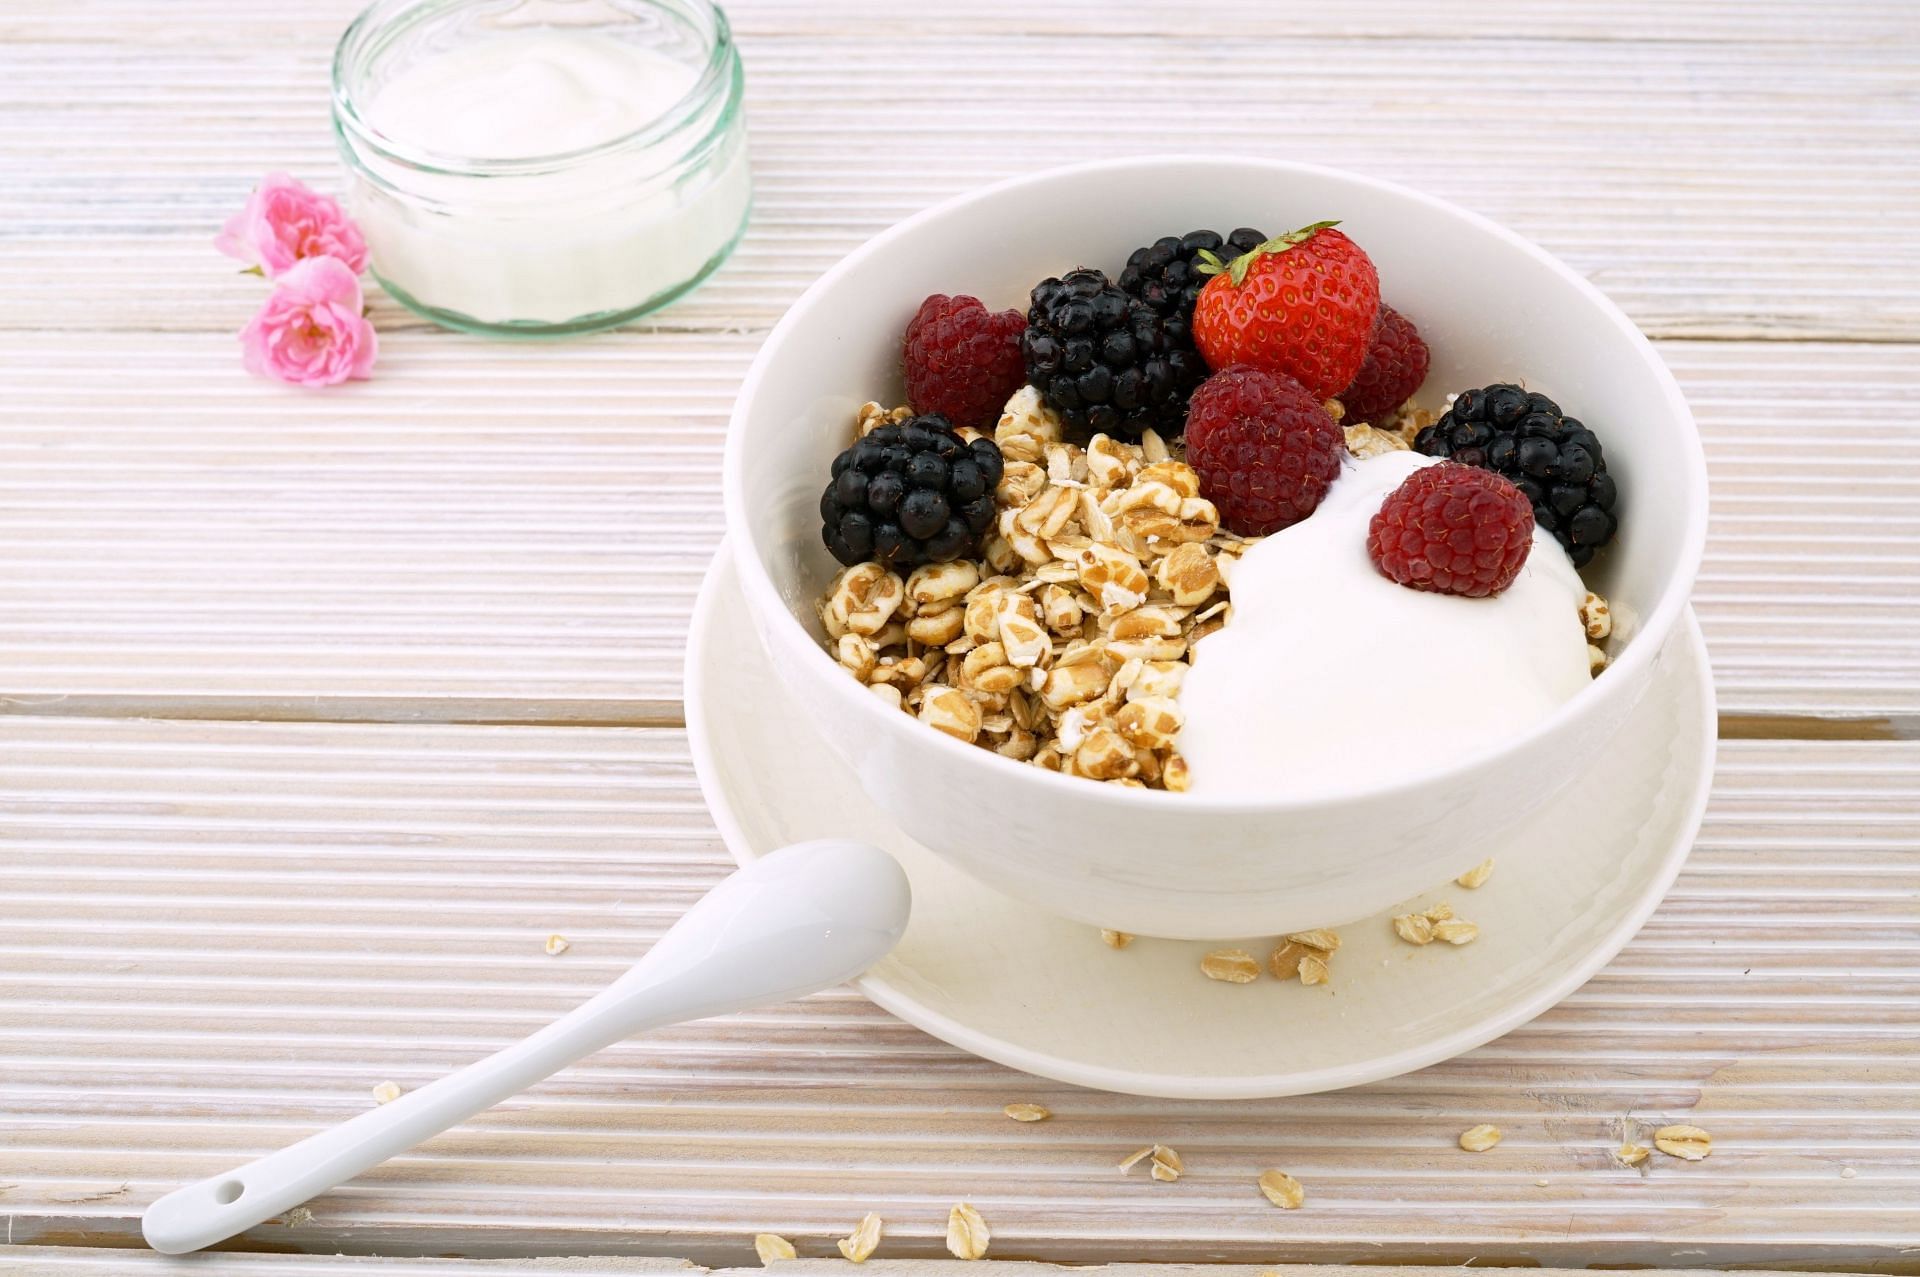 Benefits of adding yoghurt to your diet (image sourced via Pexels / Photo by Life of pix)